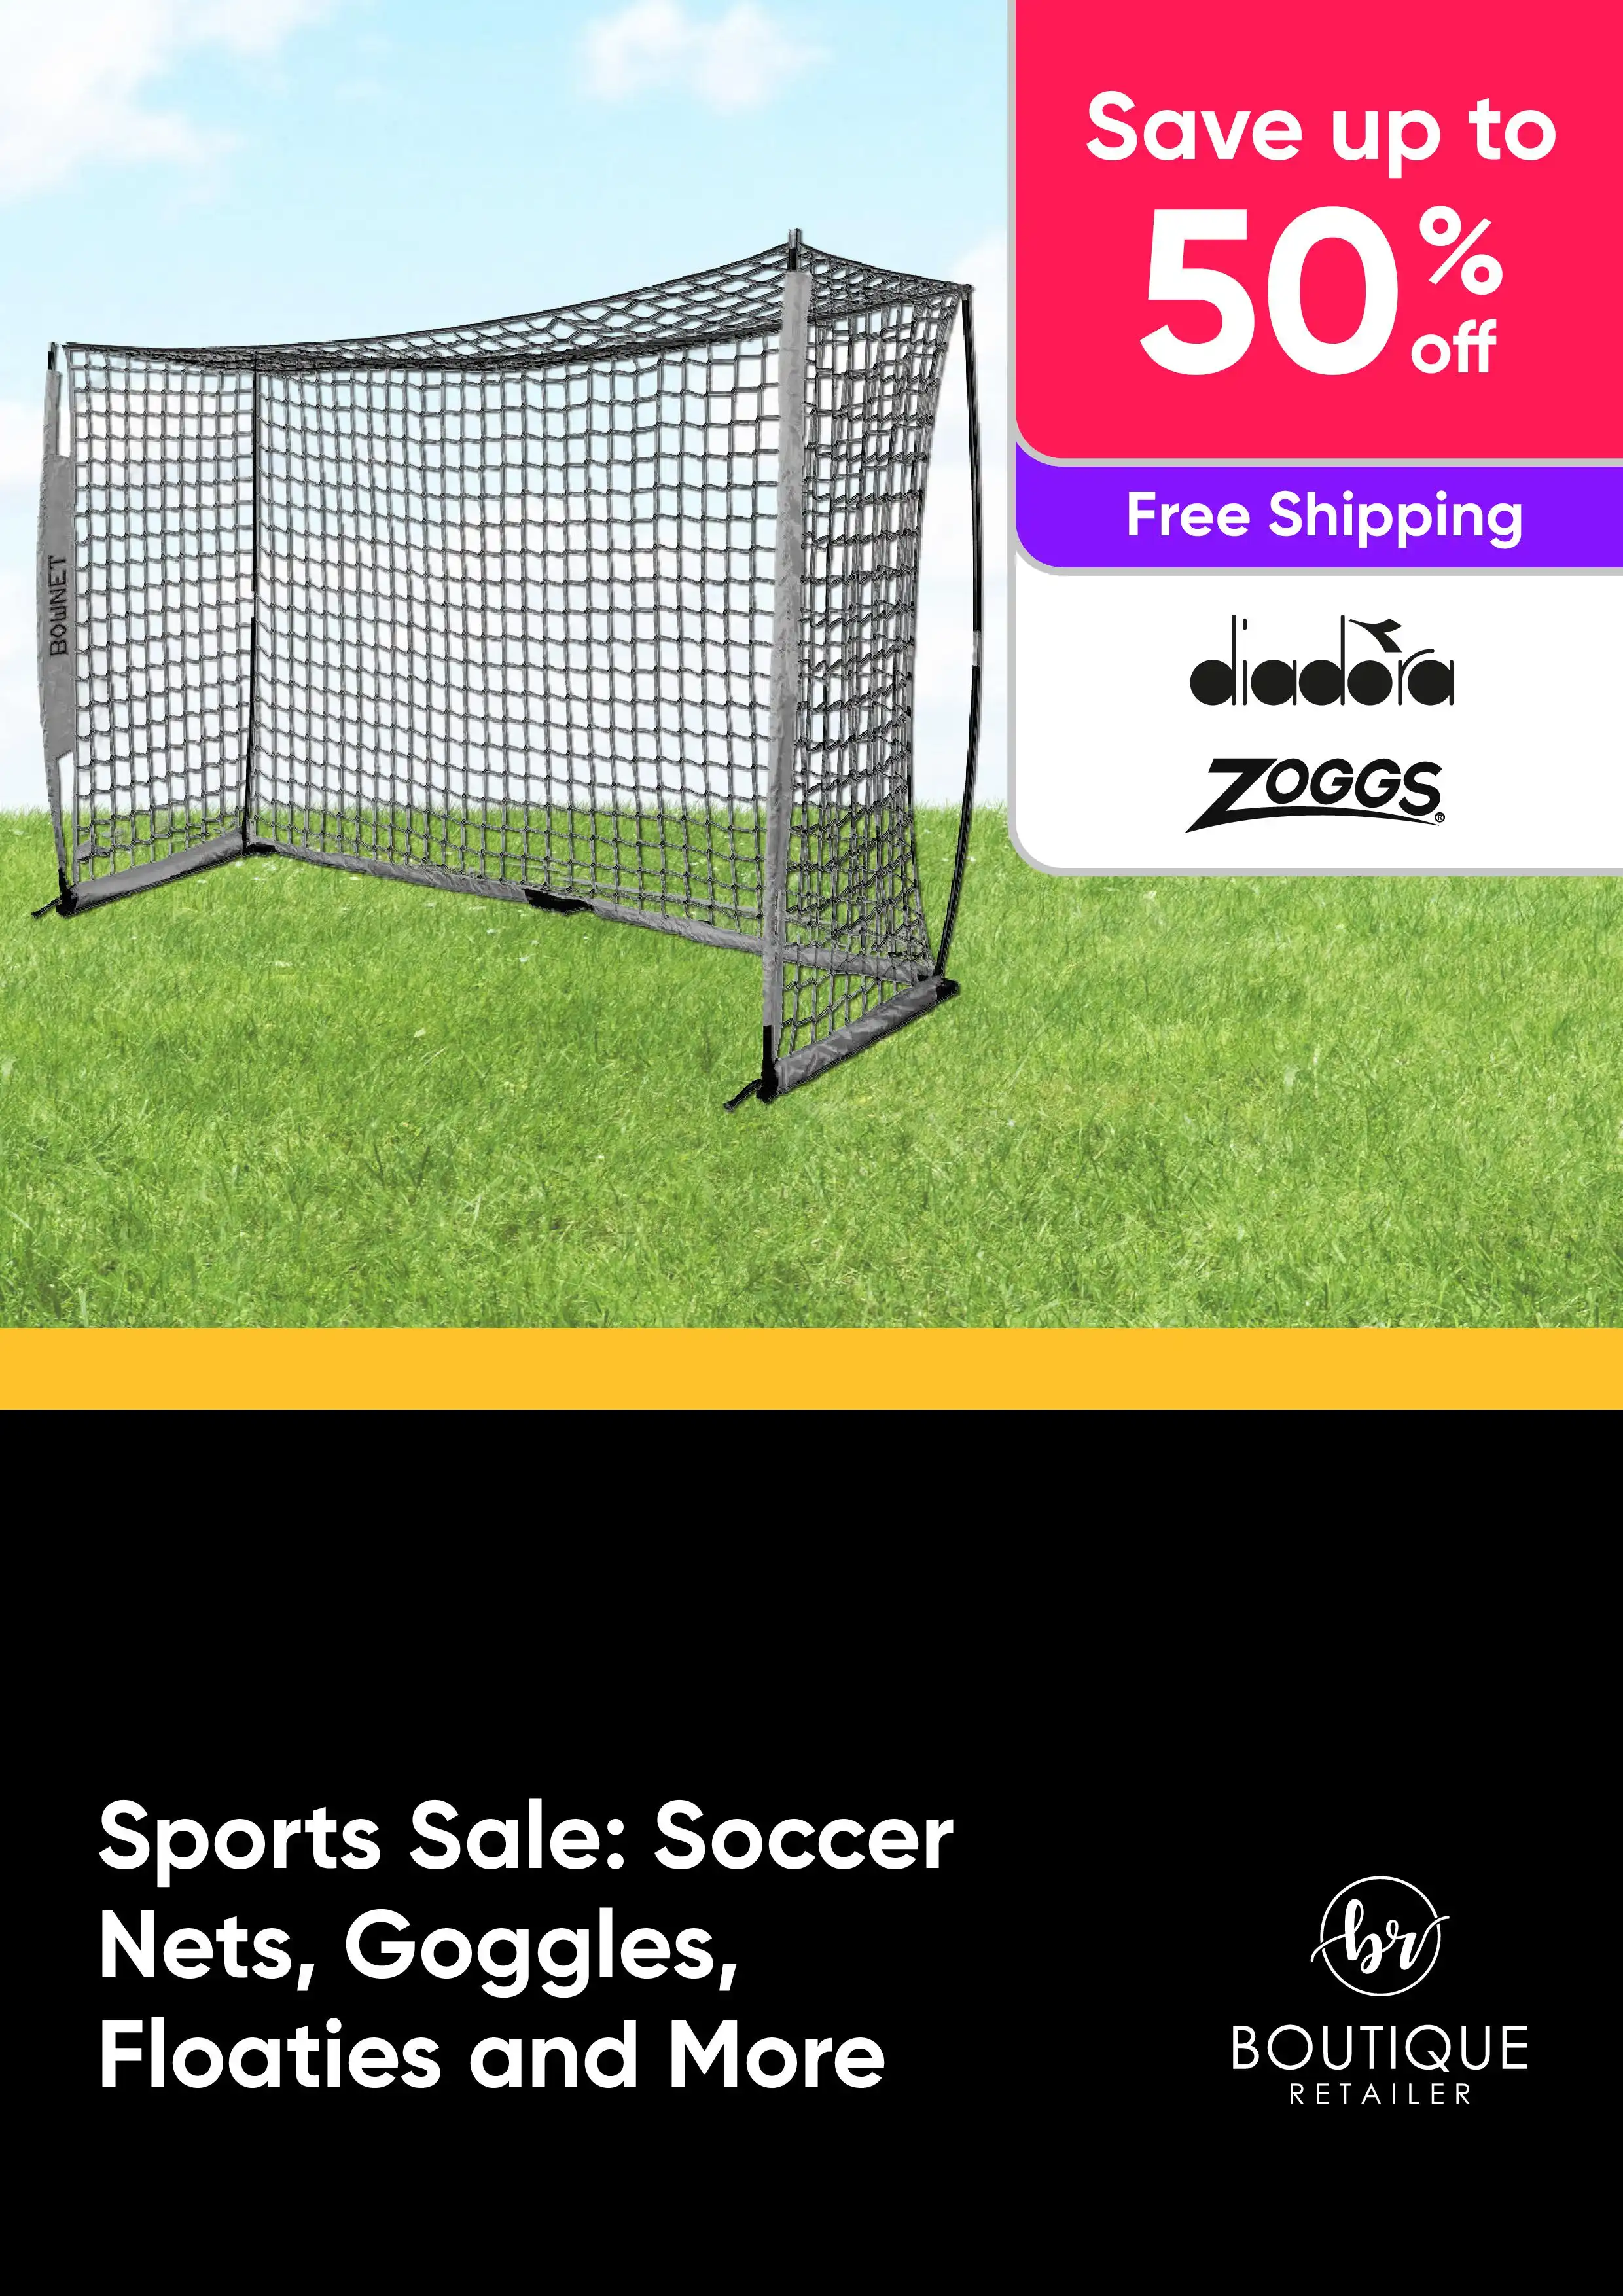 Sports Sale - Soccer Nets, Goggles, Floaties and More - Diadora, Zoggs - up to 50% off